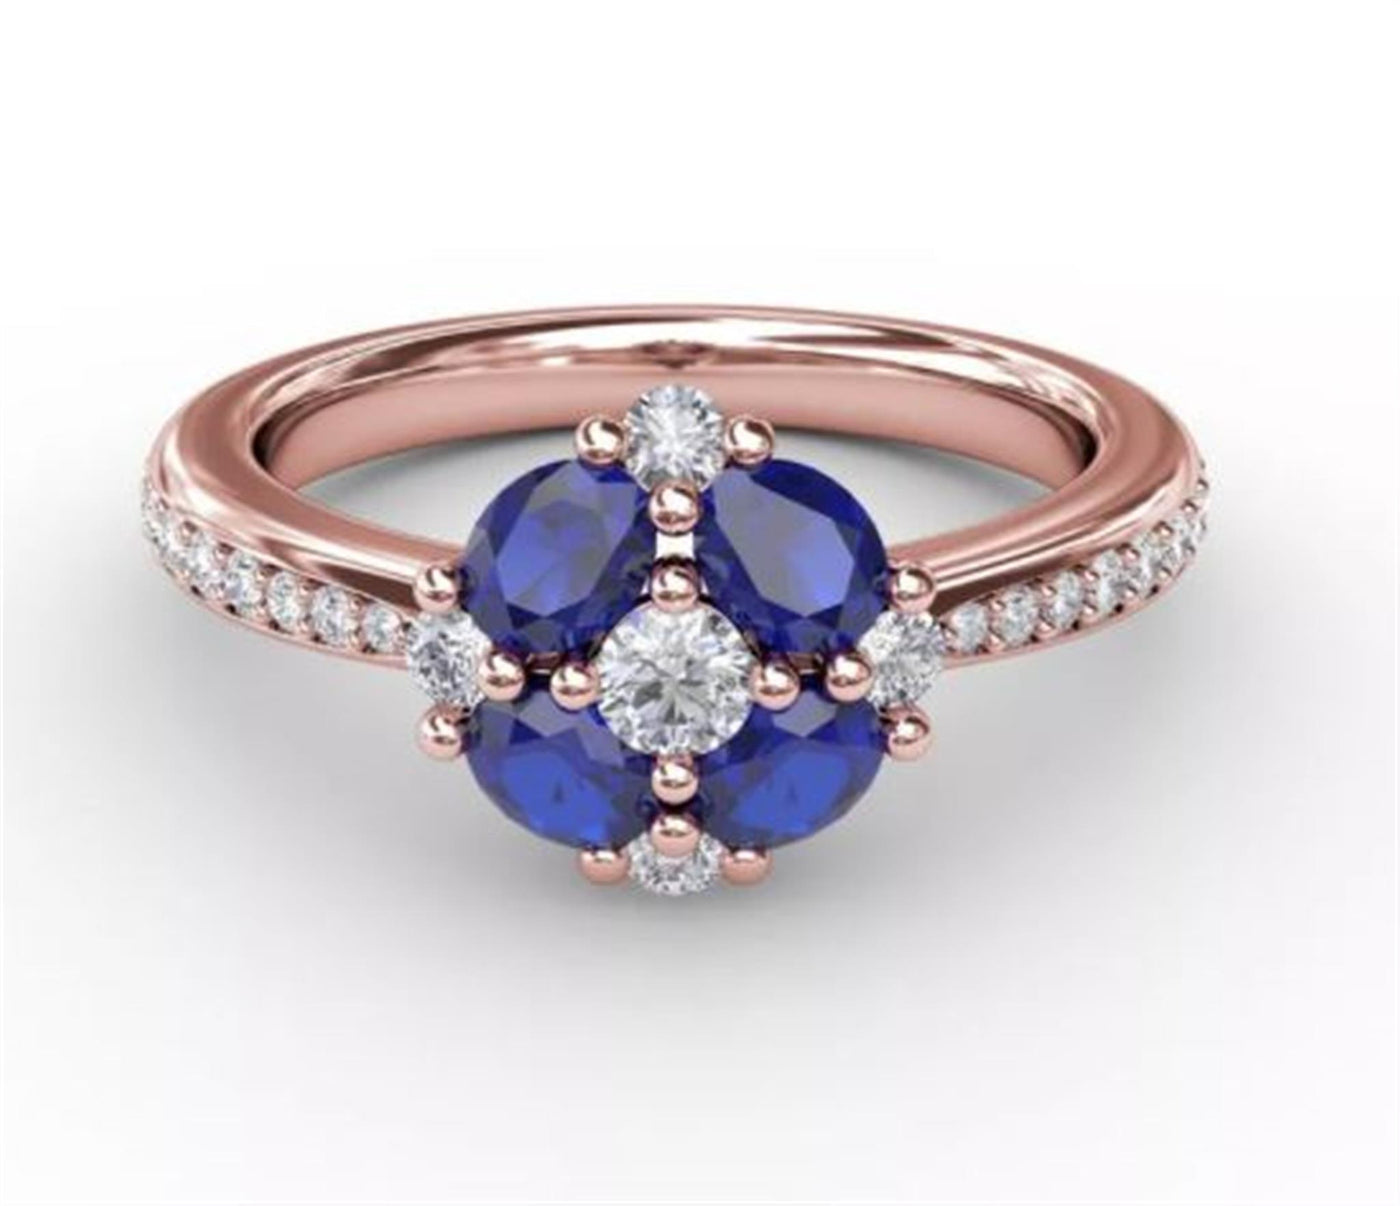 14K Rose Gold 1.08ctw Halo Style Sapphire Ring with Diamonds